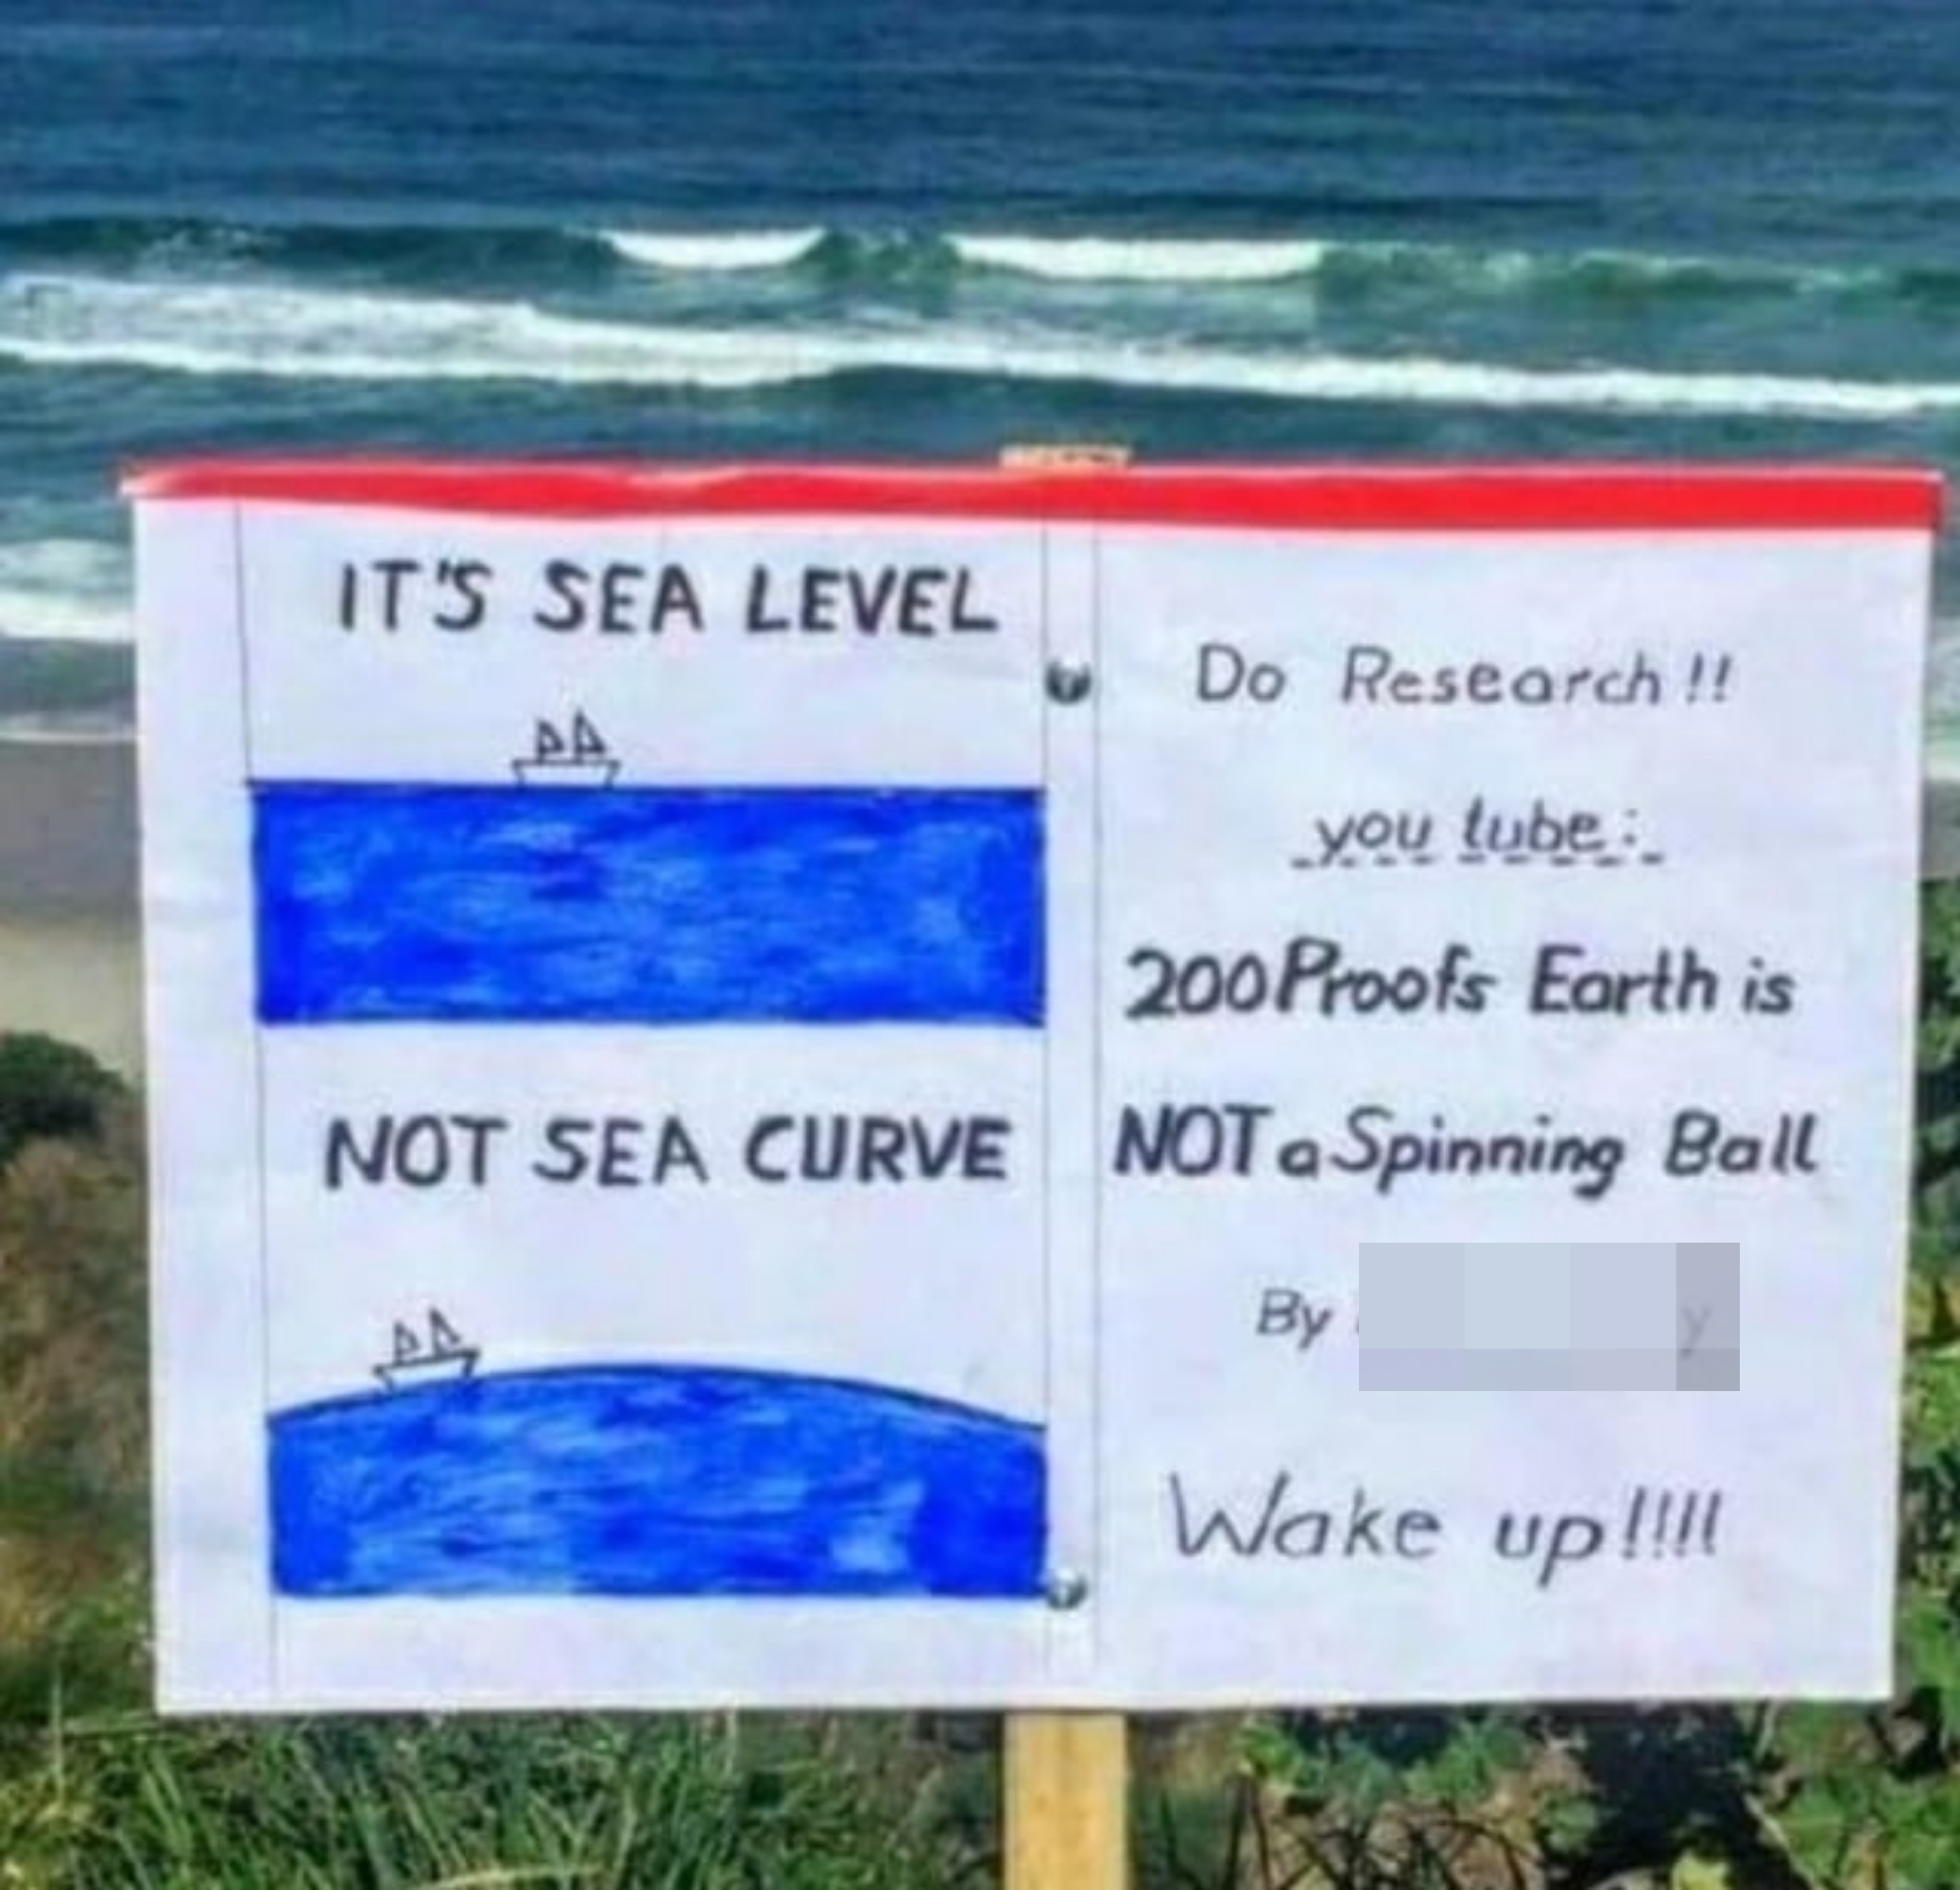 A sign by the ocean directing people to a flat earther YouTube video